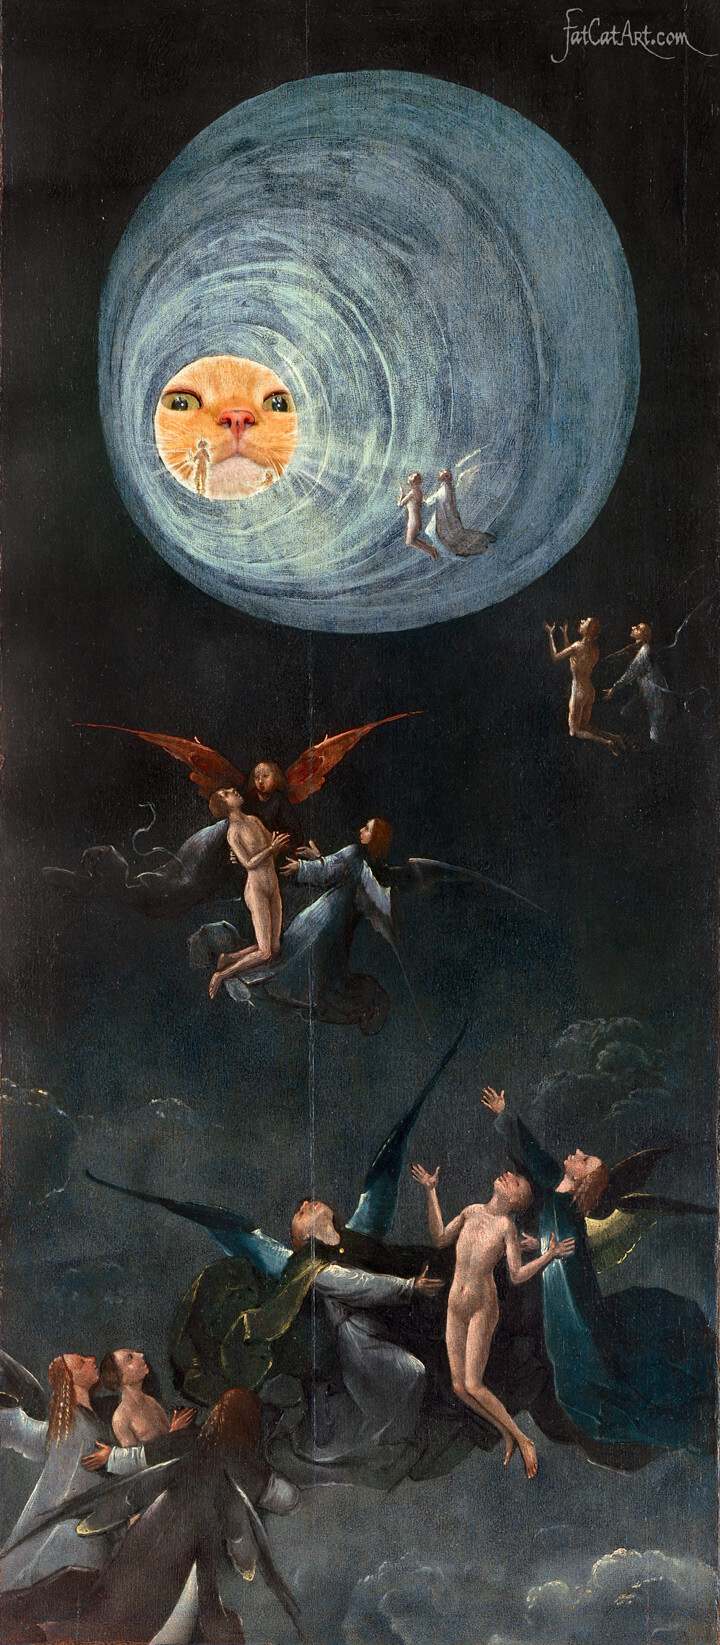 Hieronymus Bosch, The Visions of the Hereafter: The Ascent of the Blessed to the Superior Cat, the full view